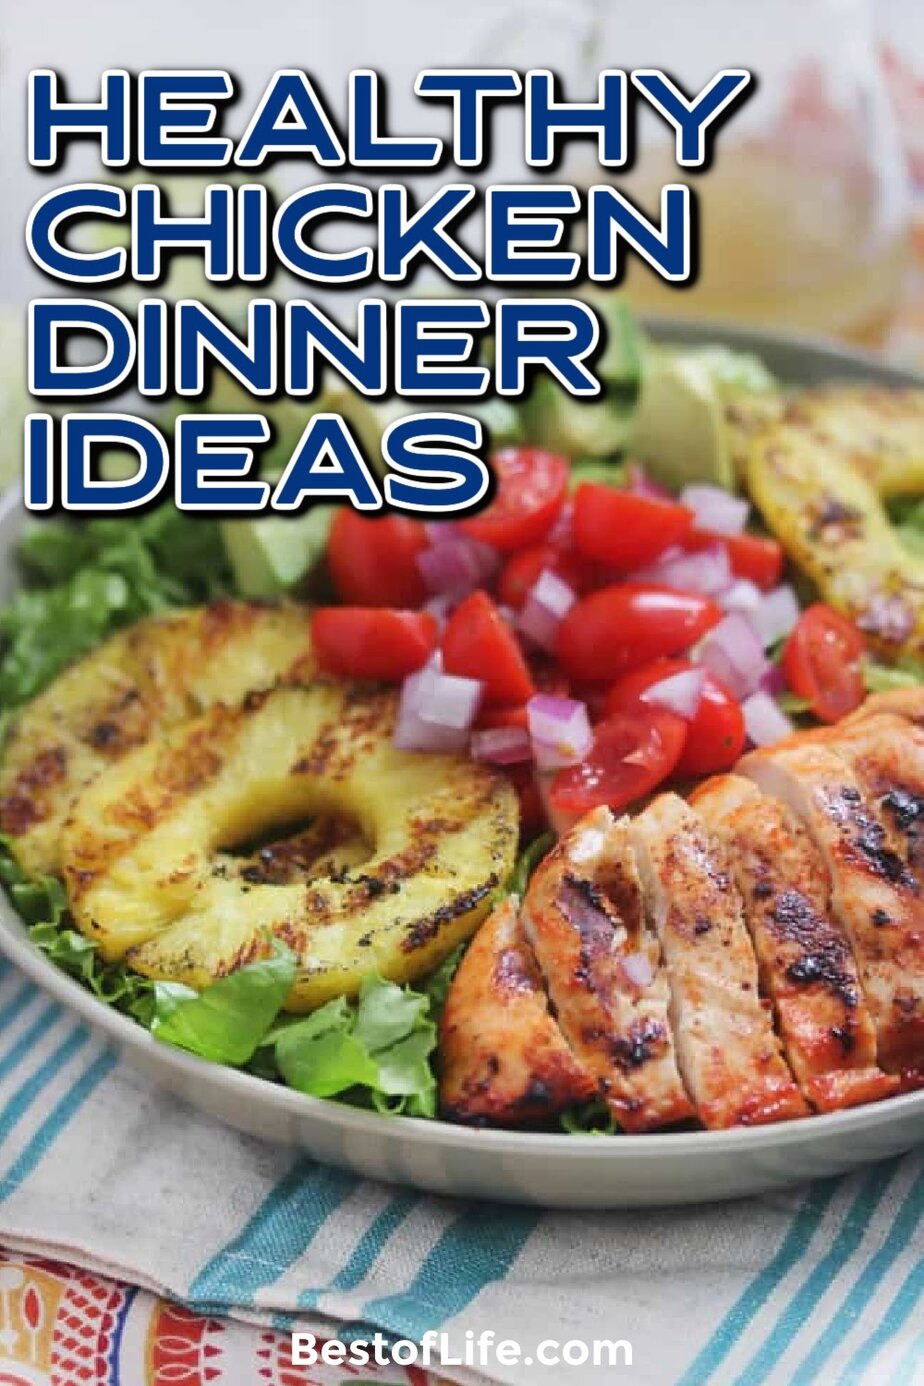 Healthy ways to cook chicken don’t have to be bland and boring. Instead, they can be fun and delicious without much effort. Healthy Ways to Cook Chicken | Best Ways to Cook Chicken | Easy Ways to Cook Chicken | Healthy Cooking Tips | Best Cooking Tips | Chicken Cooking Tips | Easy Cooking Tips | Chicken Dinner Recipes | Recipes with Chicken #chickenrecipes #dinner